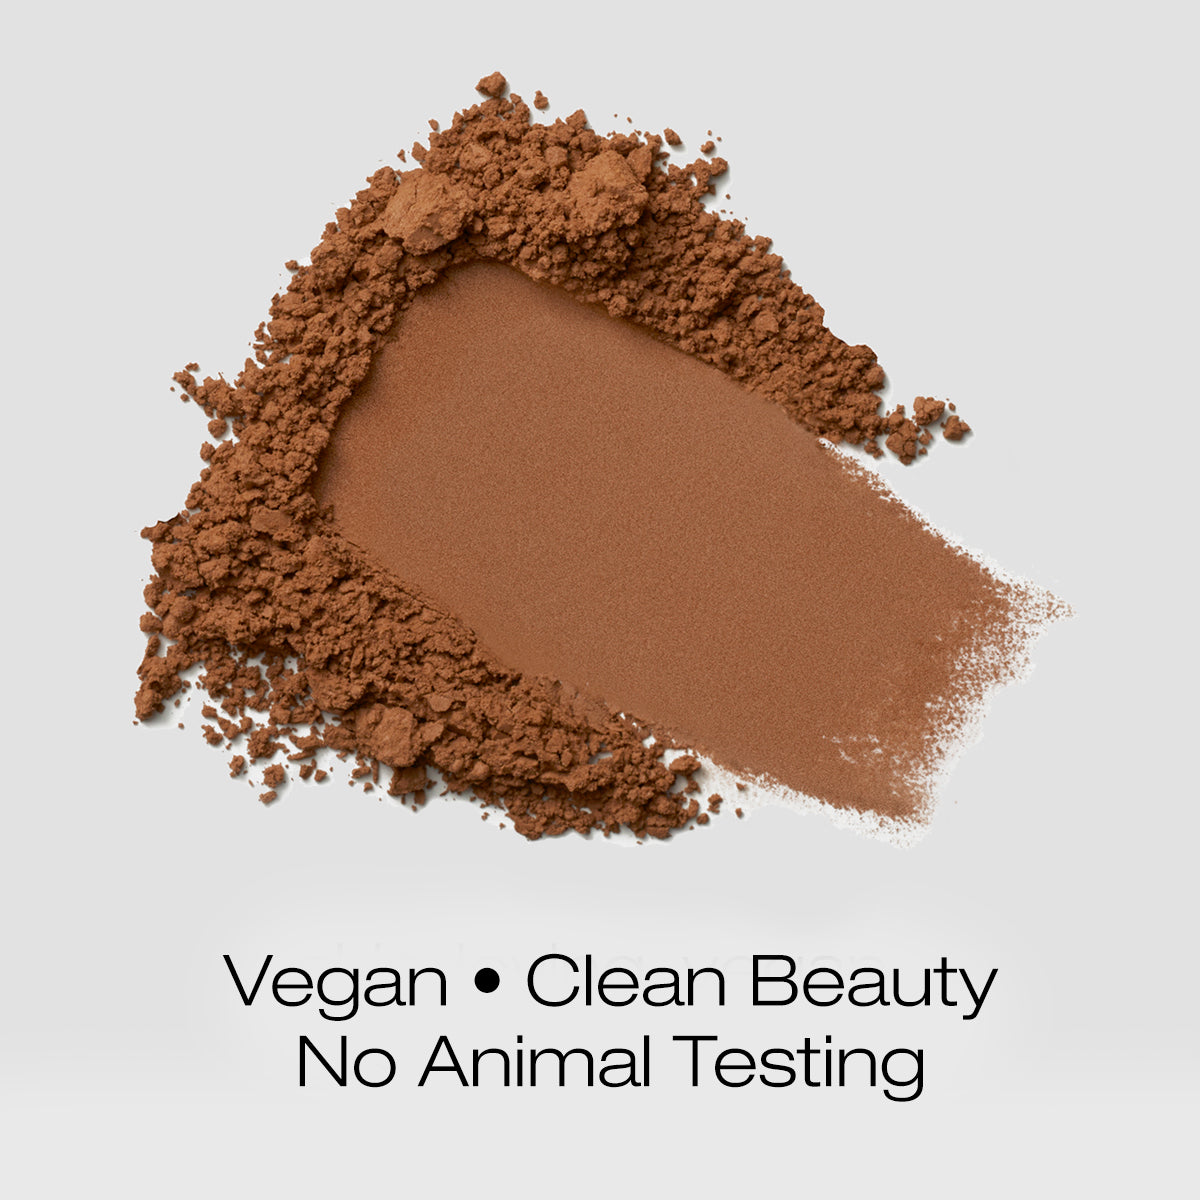 a swatch of warm brown colored foundation powder indicating that the formula is vegan, clean beauty and is not tested on animals